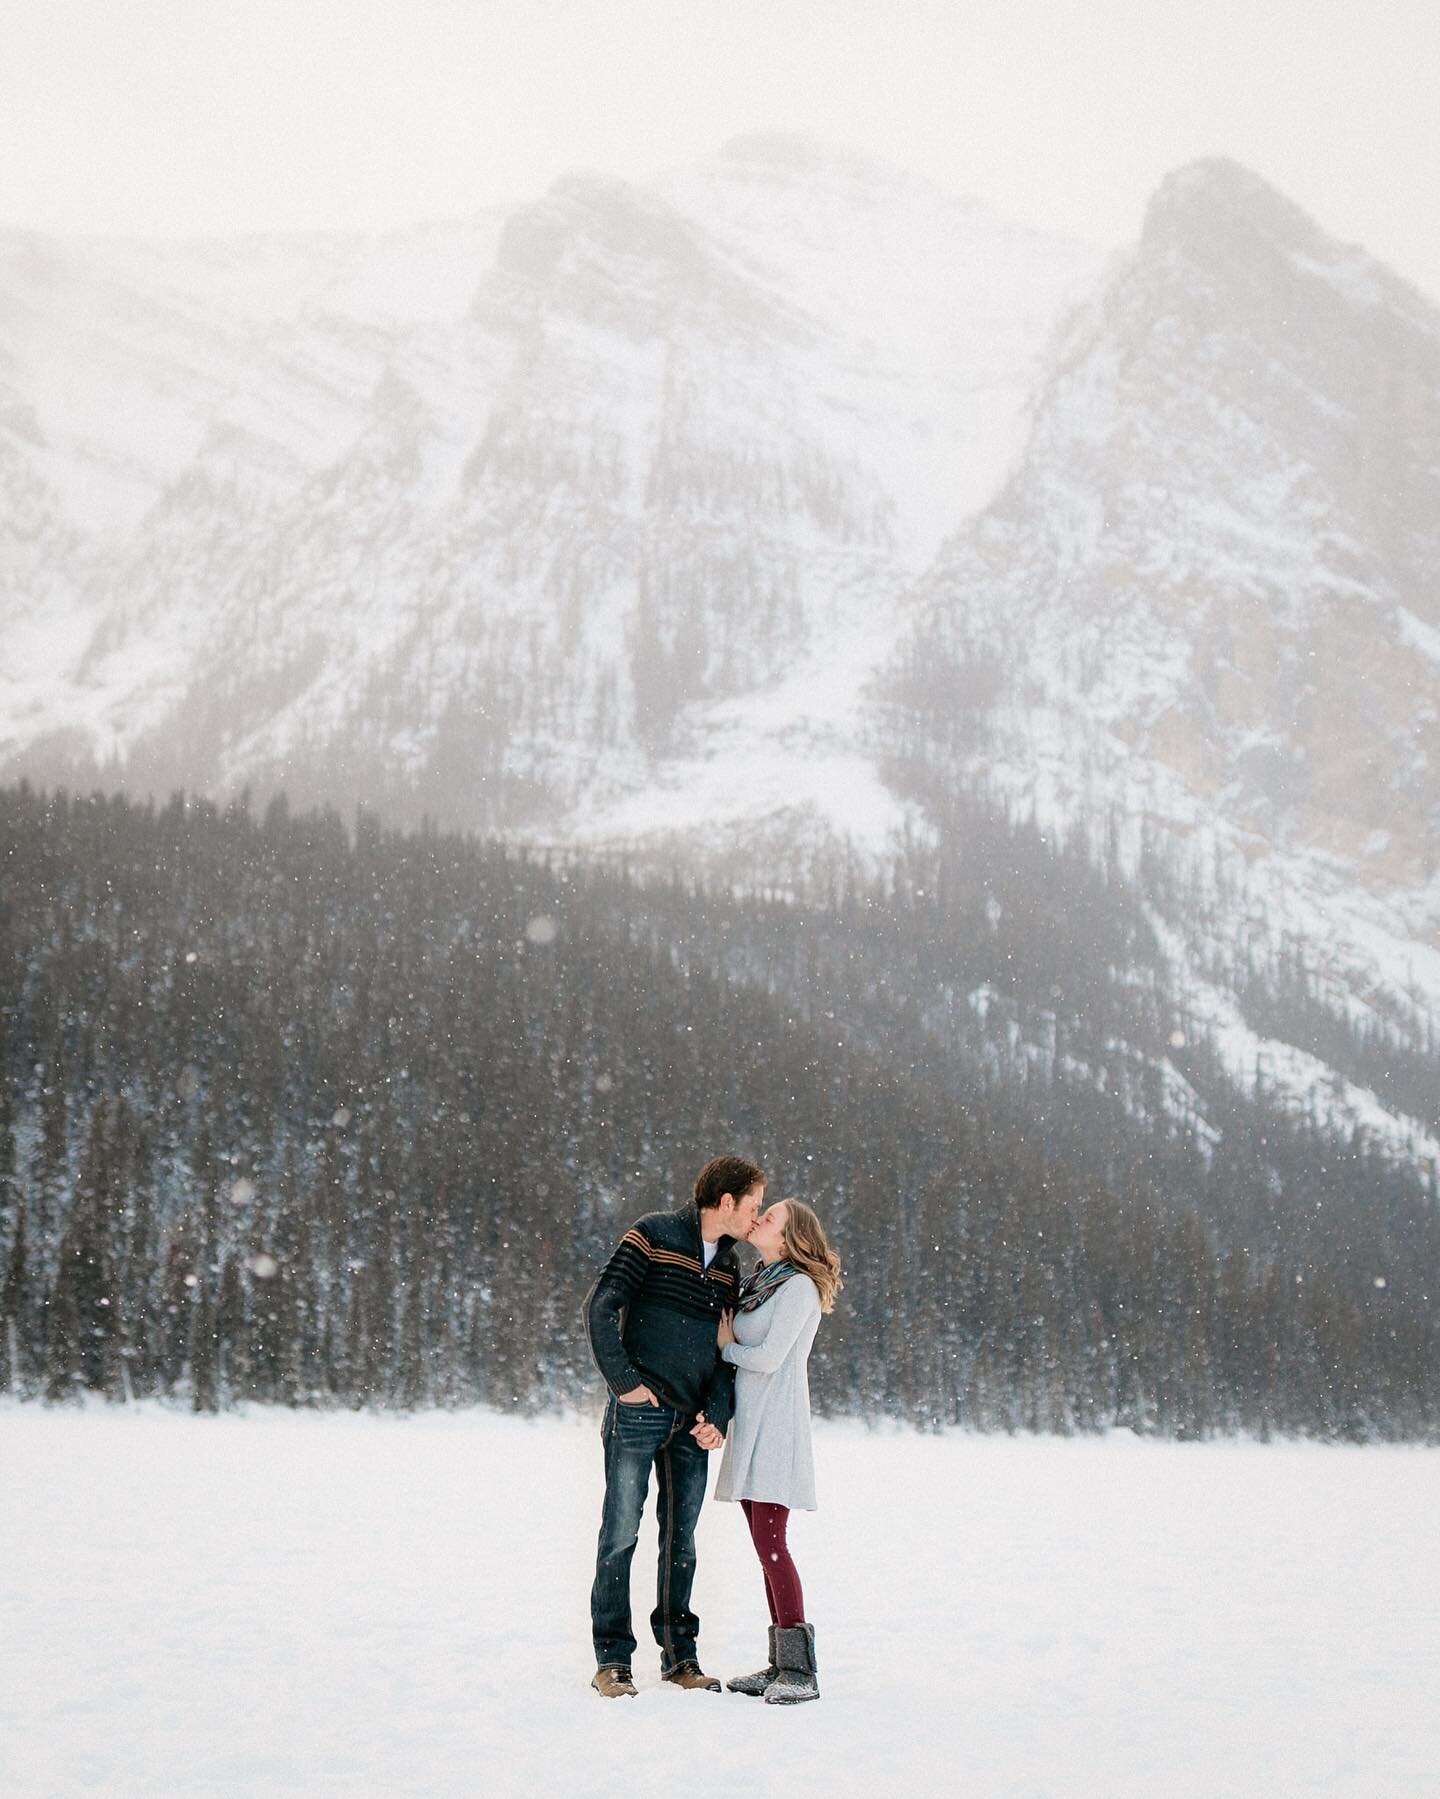 A little throwback to this snowy engagement session in the Canadian Rockies. 🌨️❄️